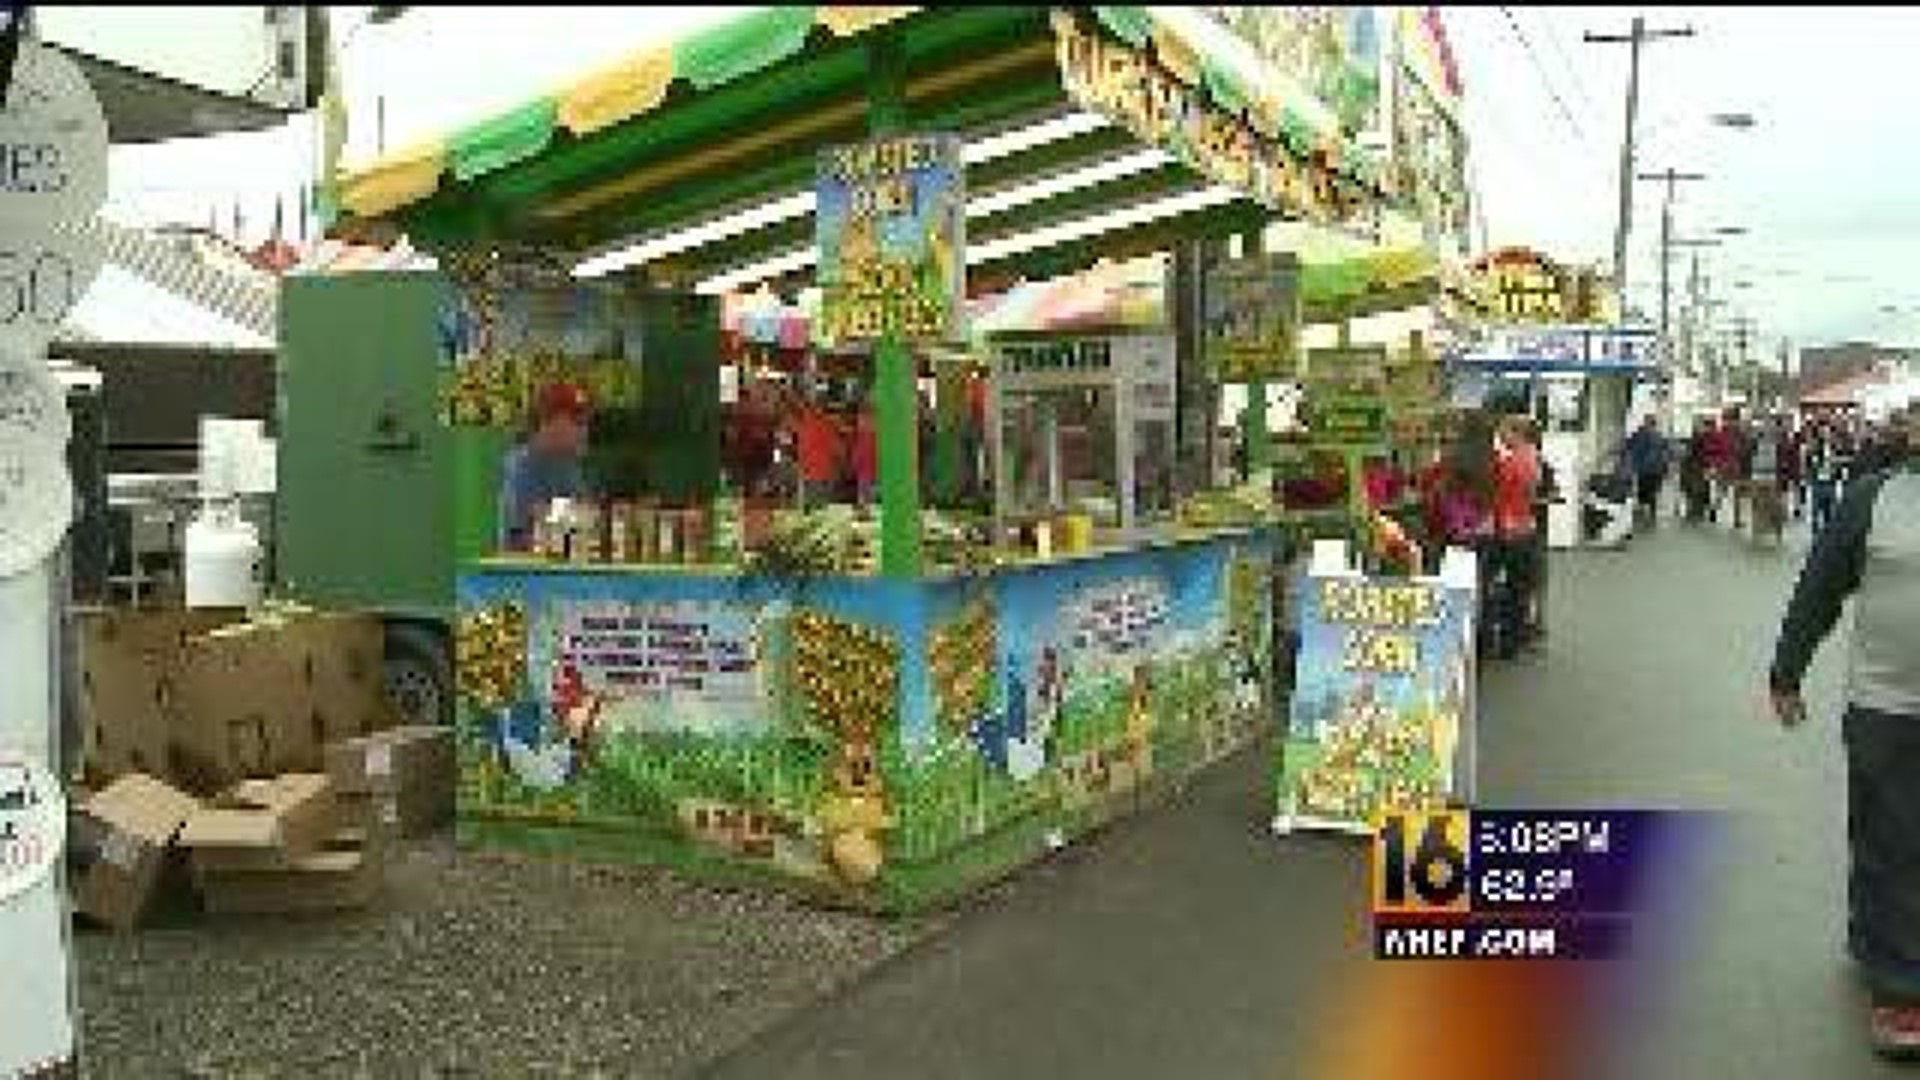 Healthy Options at the Bloomsburg Fair